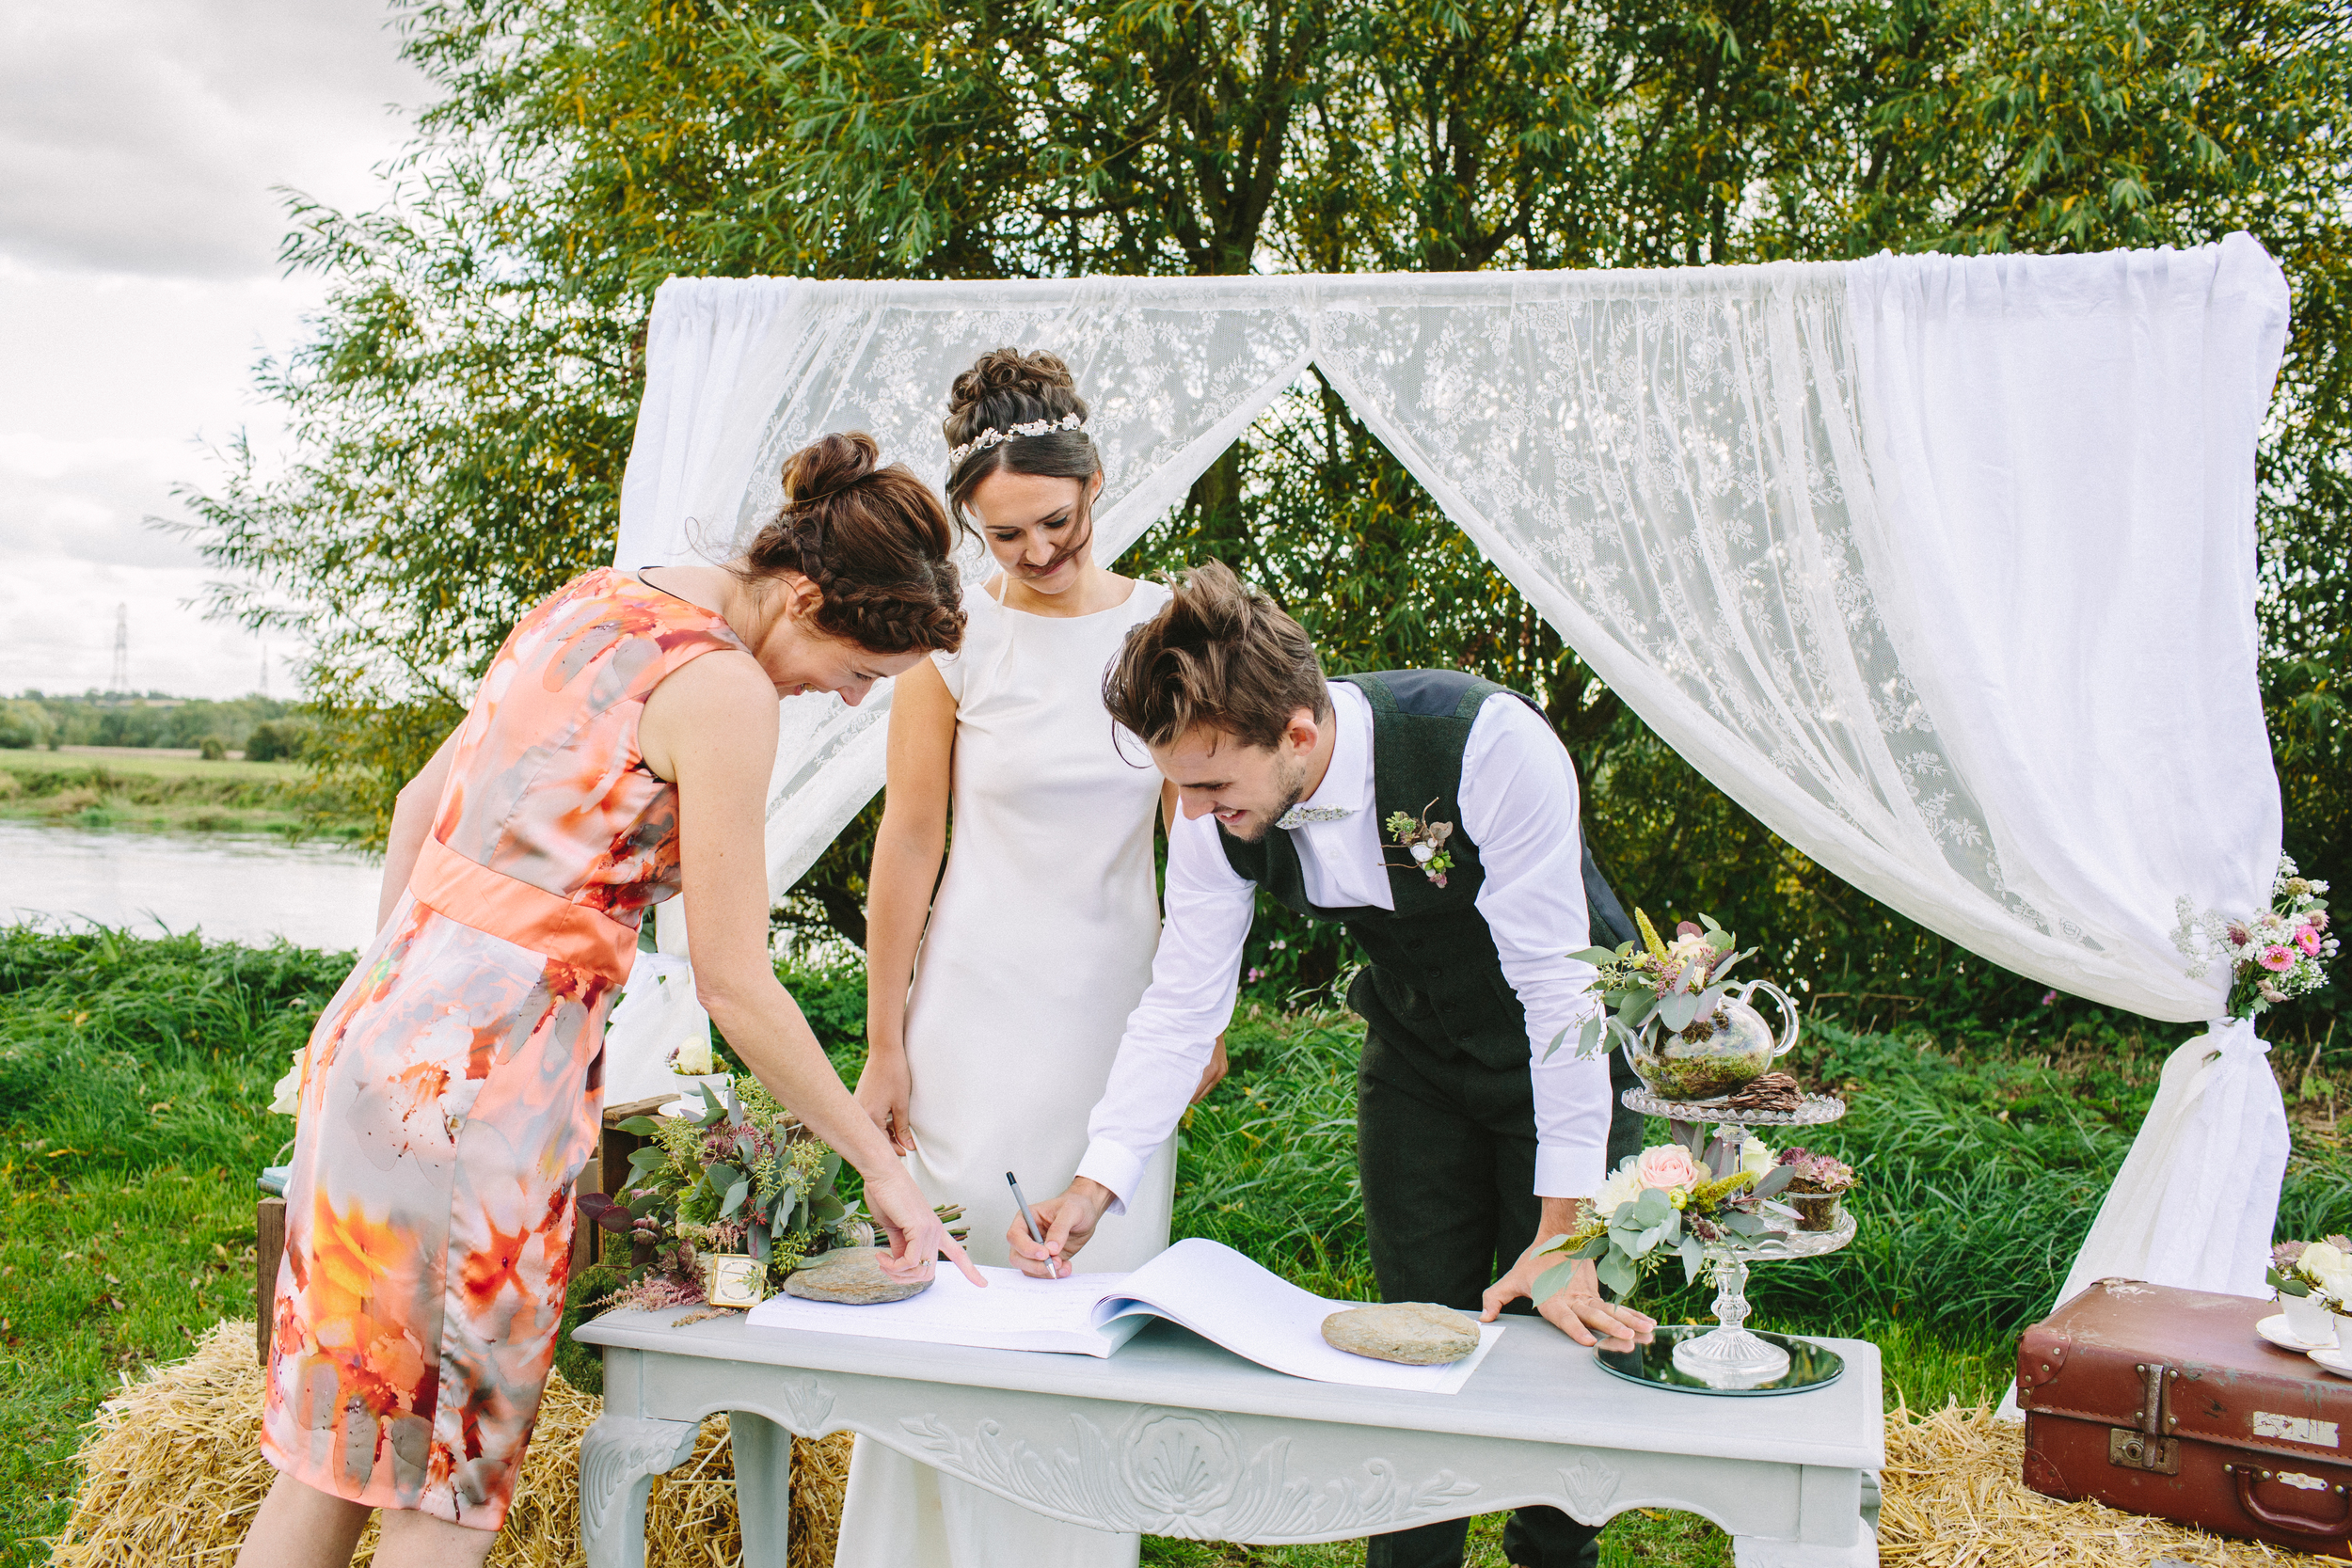 Cuttlebrook, Derbyshire - A Styled Shoot | www.myperfectceremony.co.uk